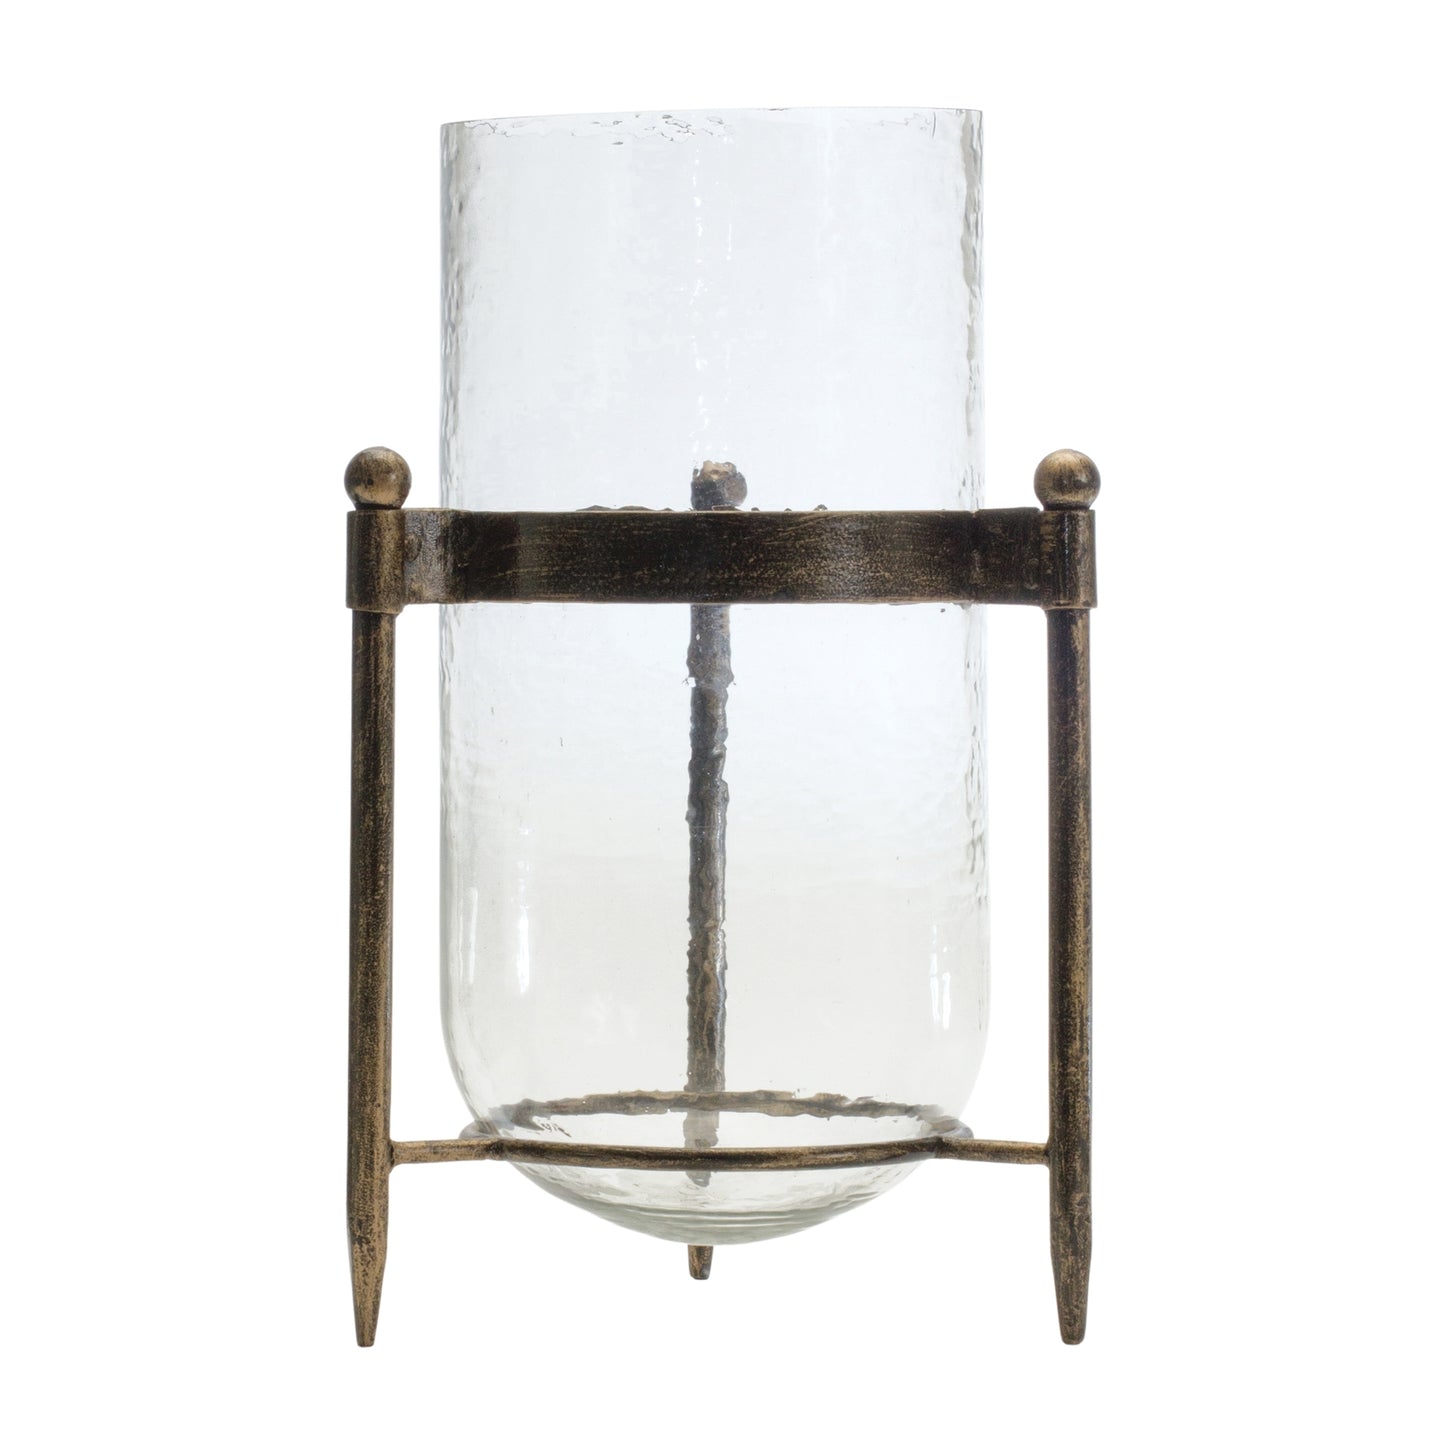 Glass Candle Holder in Metal Stand